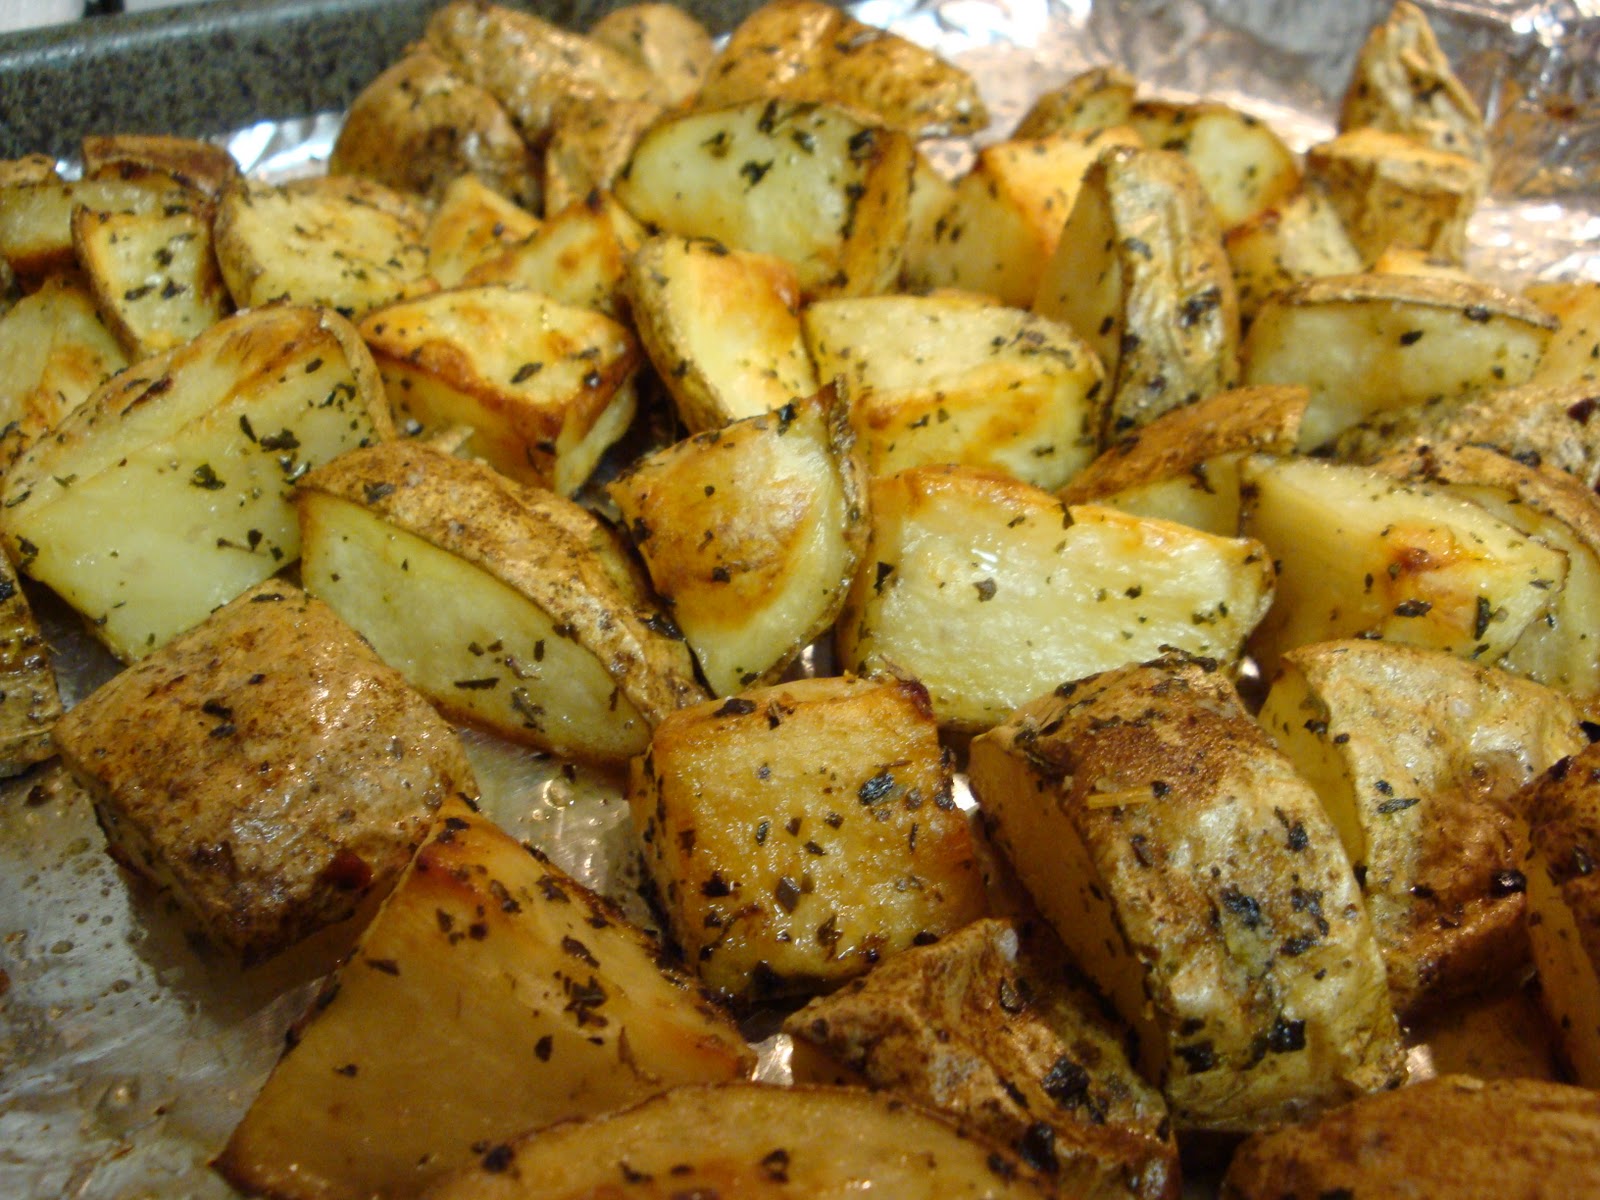 kimscookingfrenzy: Smoky Pork Medallions with Oven Roasted Potatoes